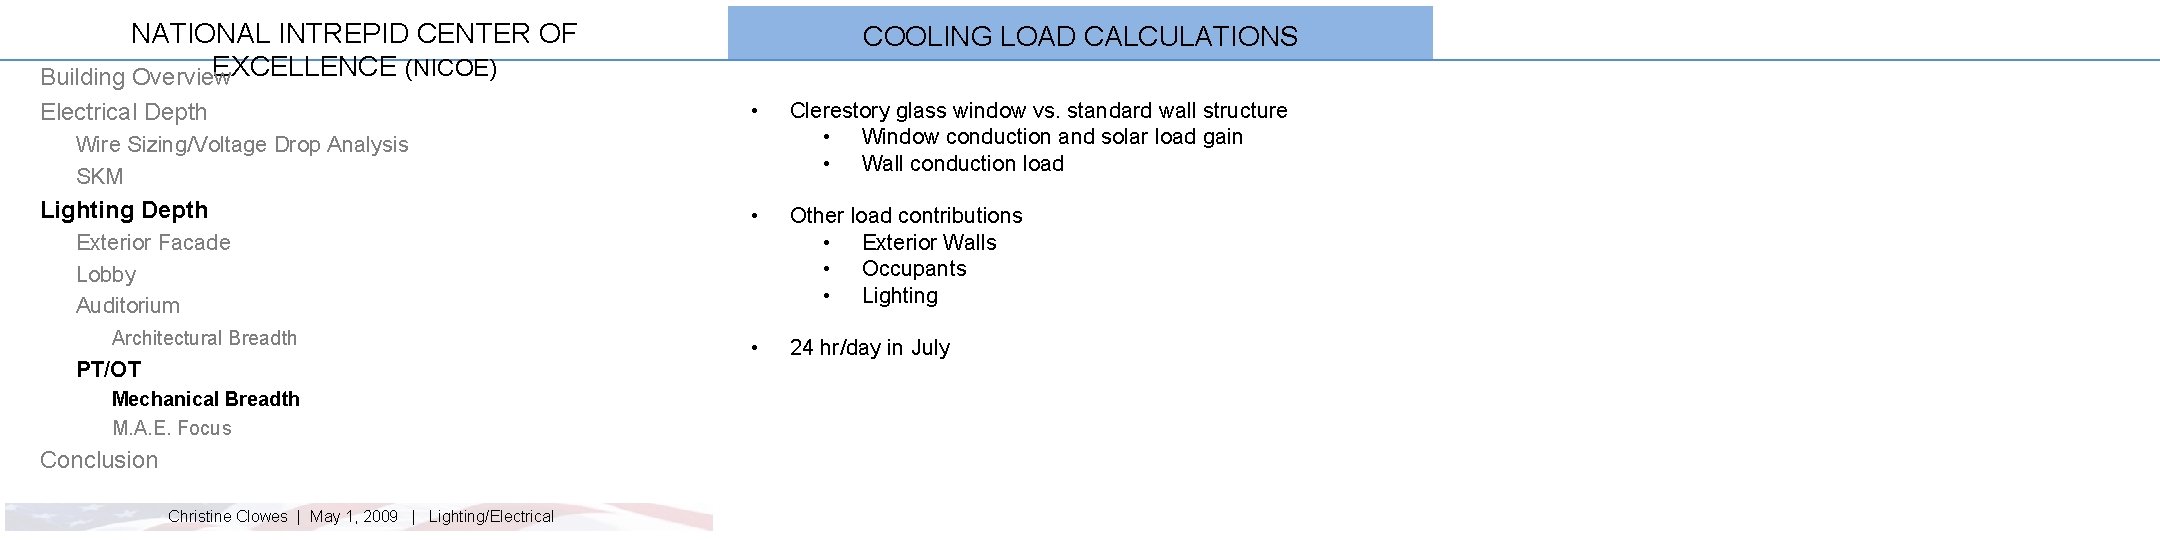 NATIONAL INTREPID CENTER OF EXCELLENCE (NICOE) Building Overview Electrical Depth COOLING LOAD CALCULATIONS •